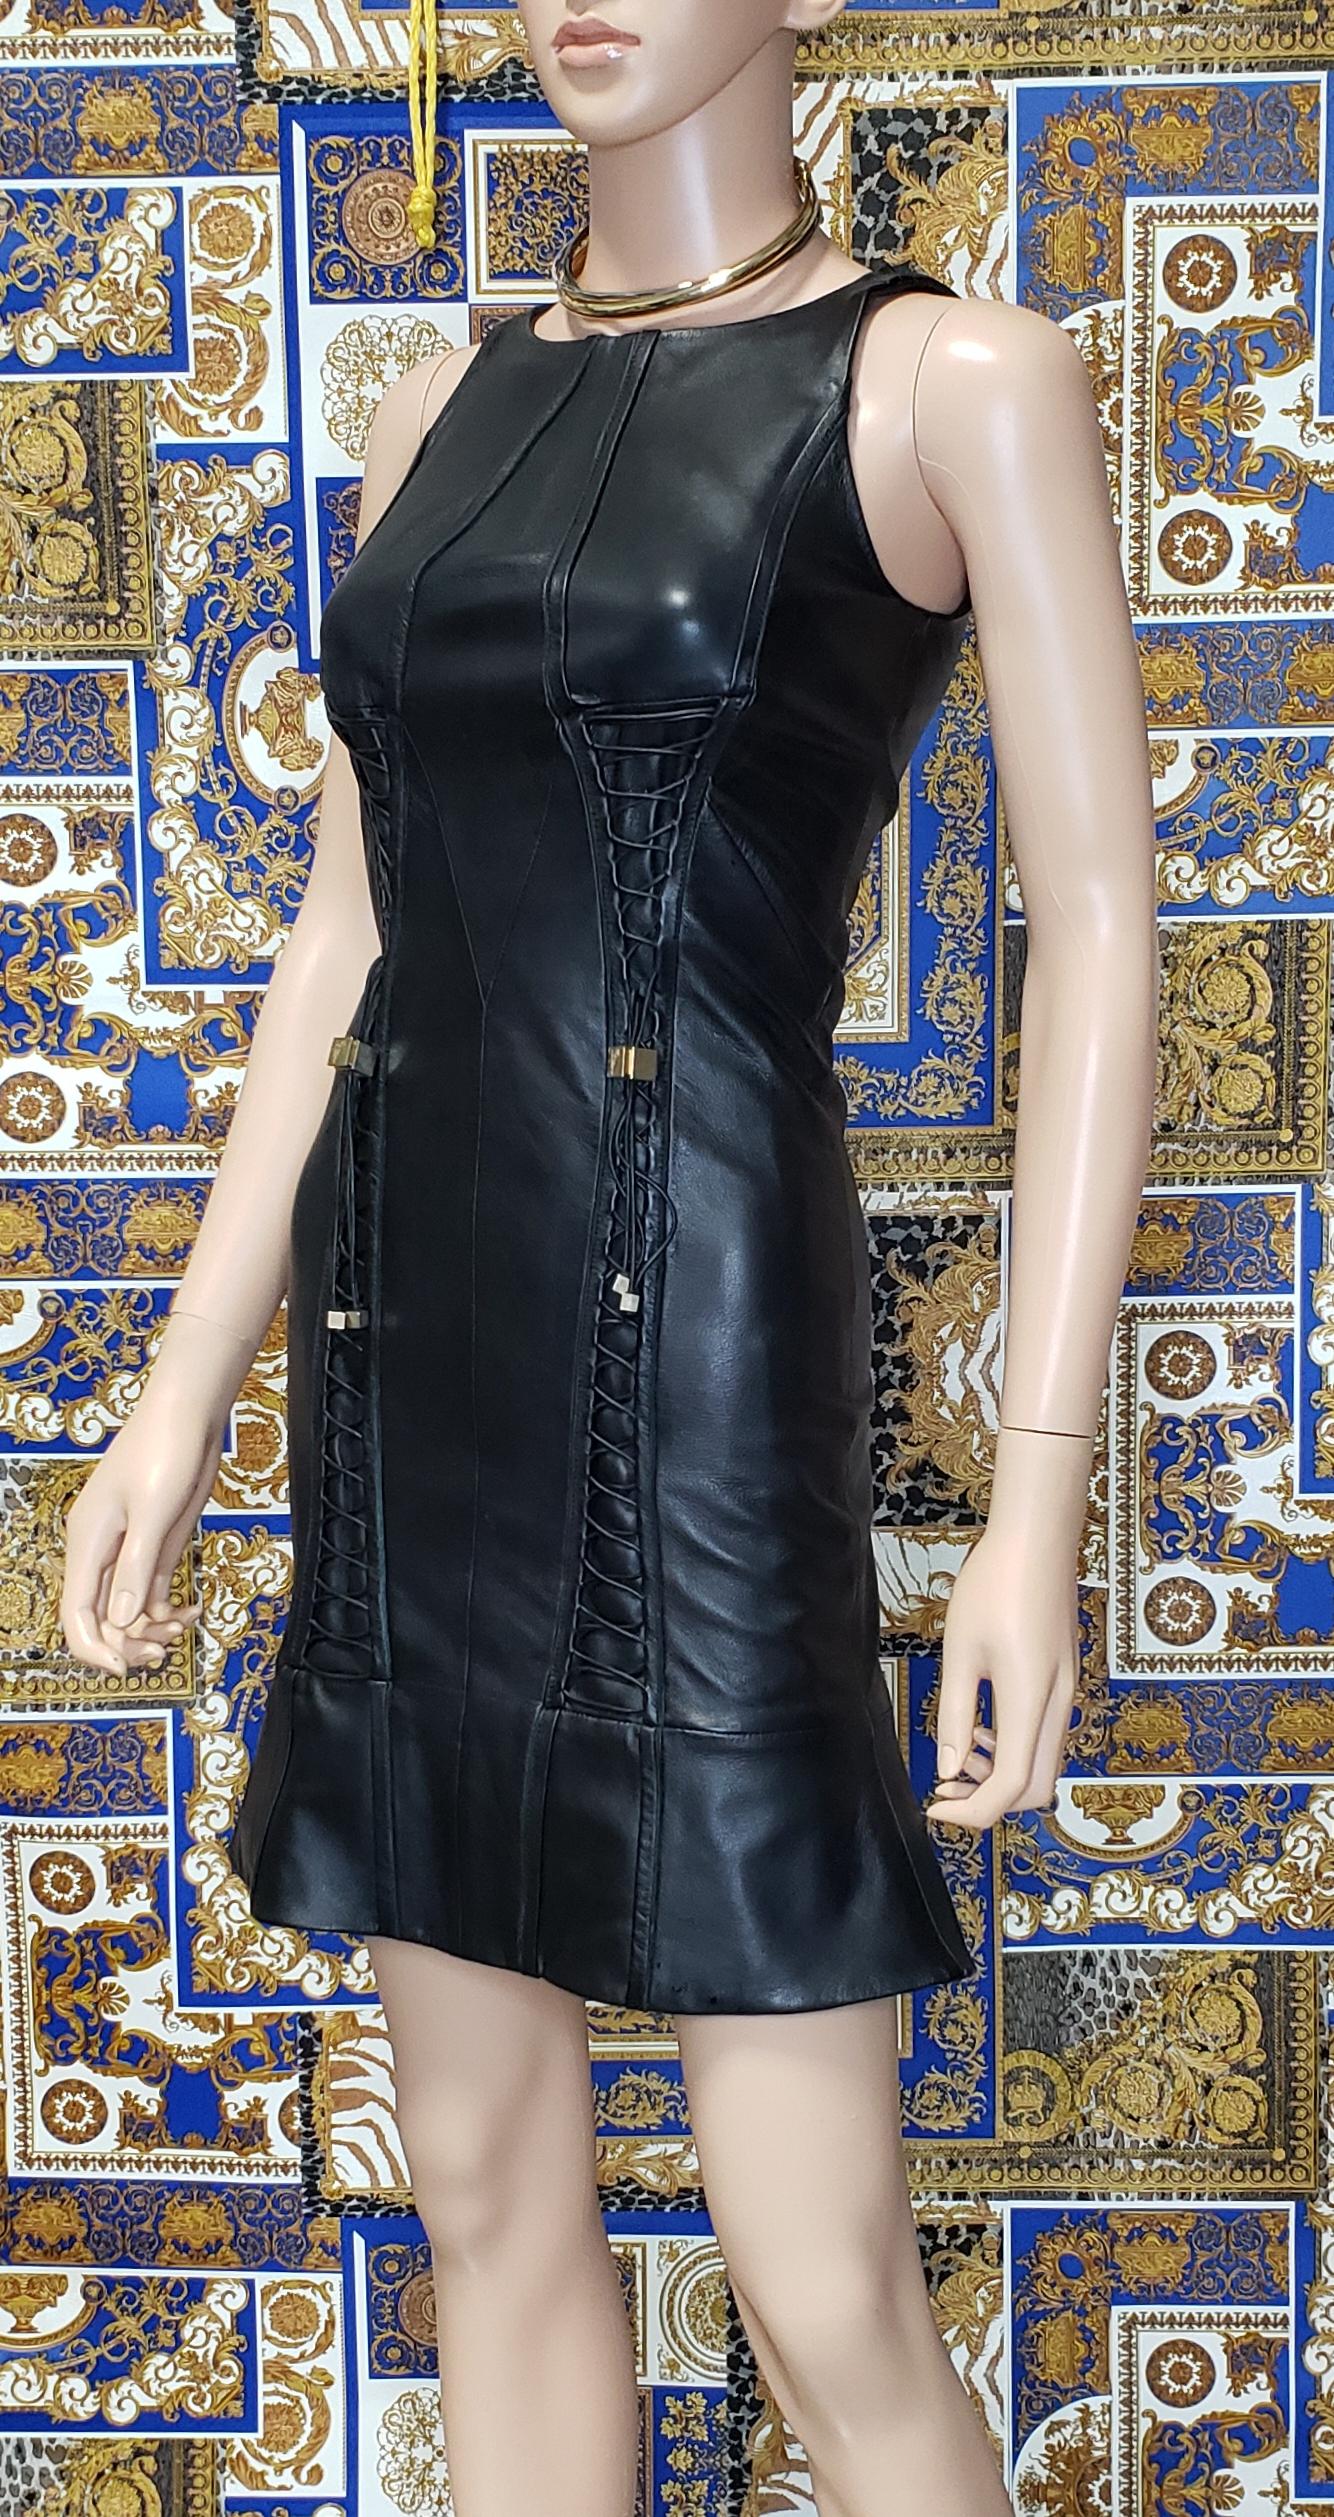 Women's VERSACE BLACK LEATHER DRESS with TASSELS 38 - 4 For Sale